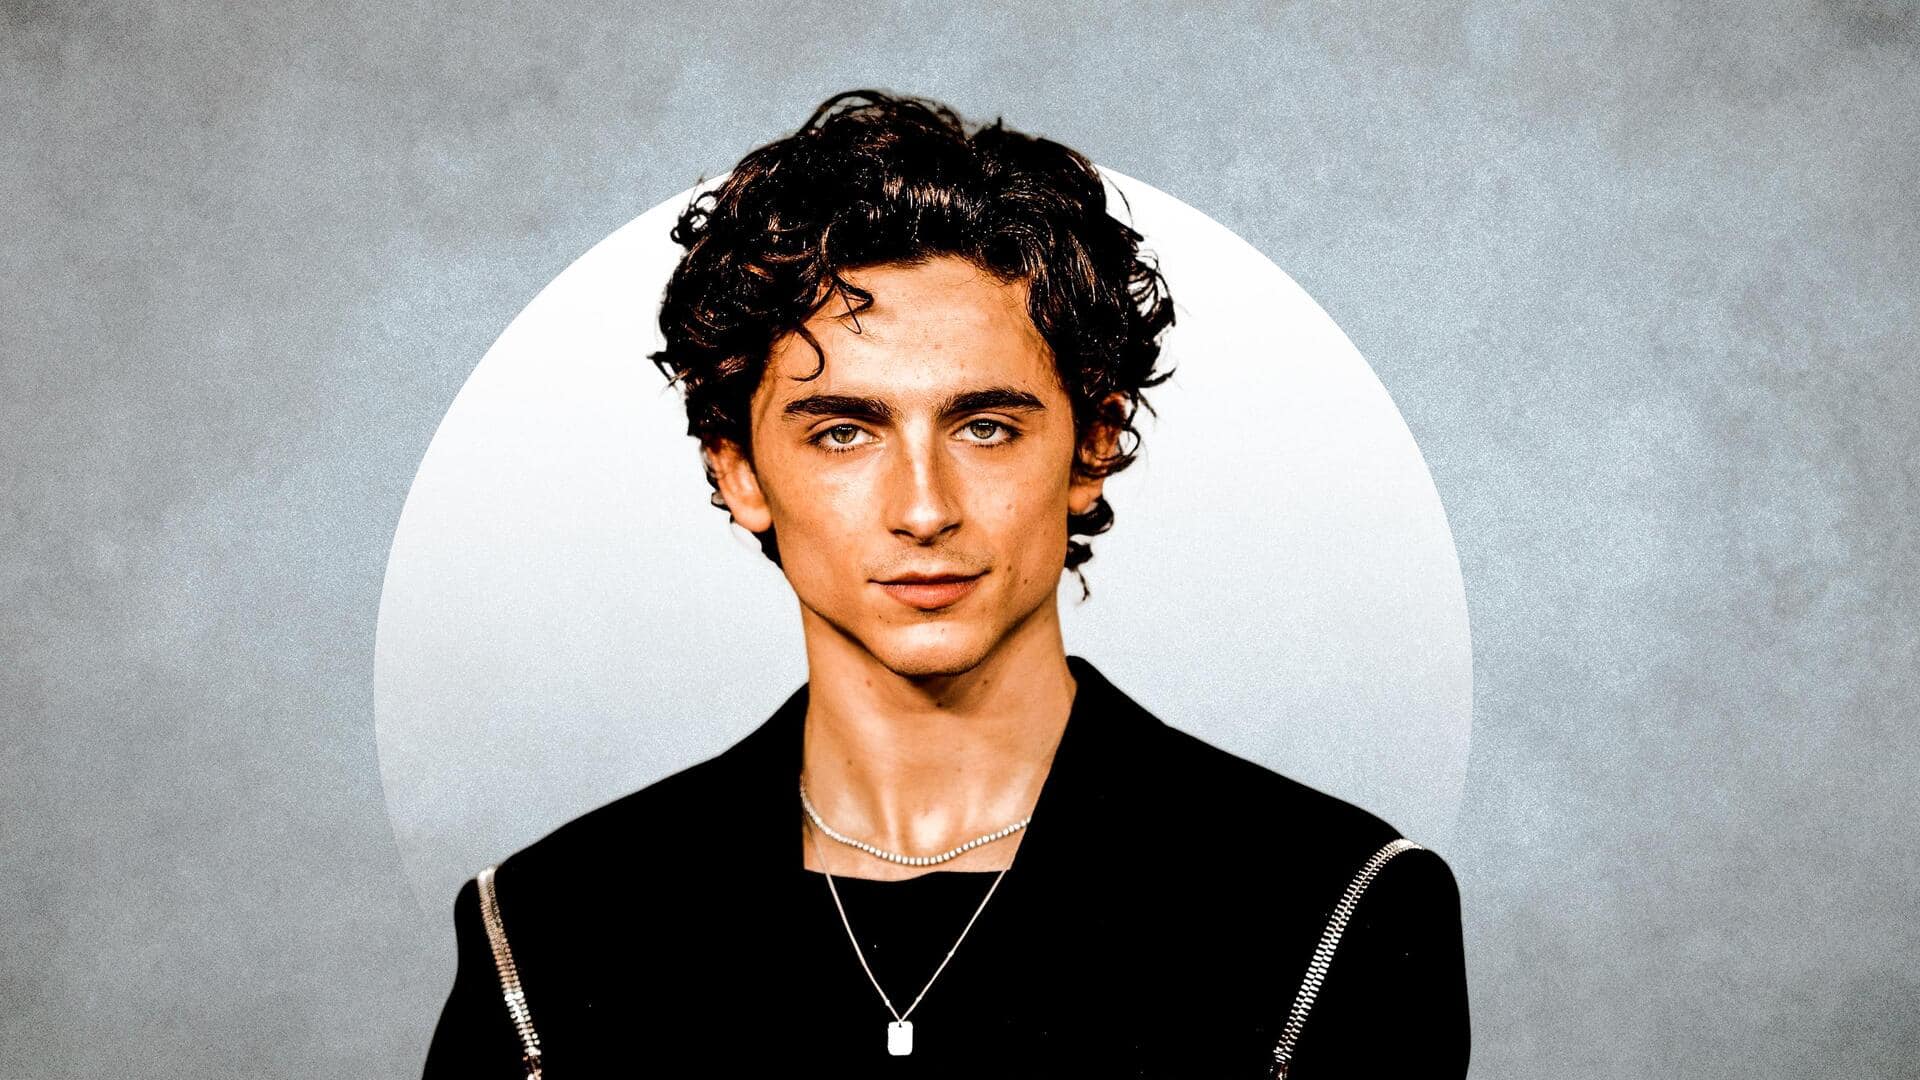 Timothée Chalamet's relationships: Know everyone the Hollywood actor has dated